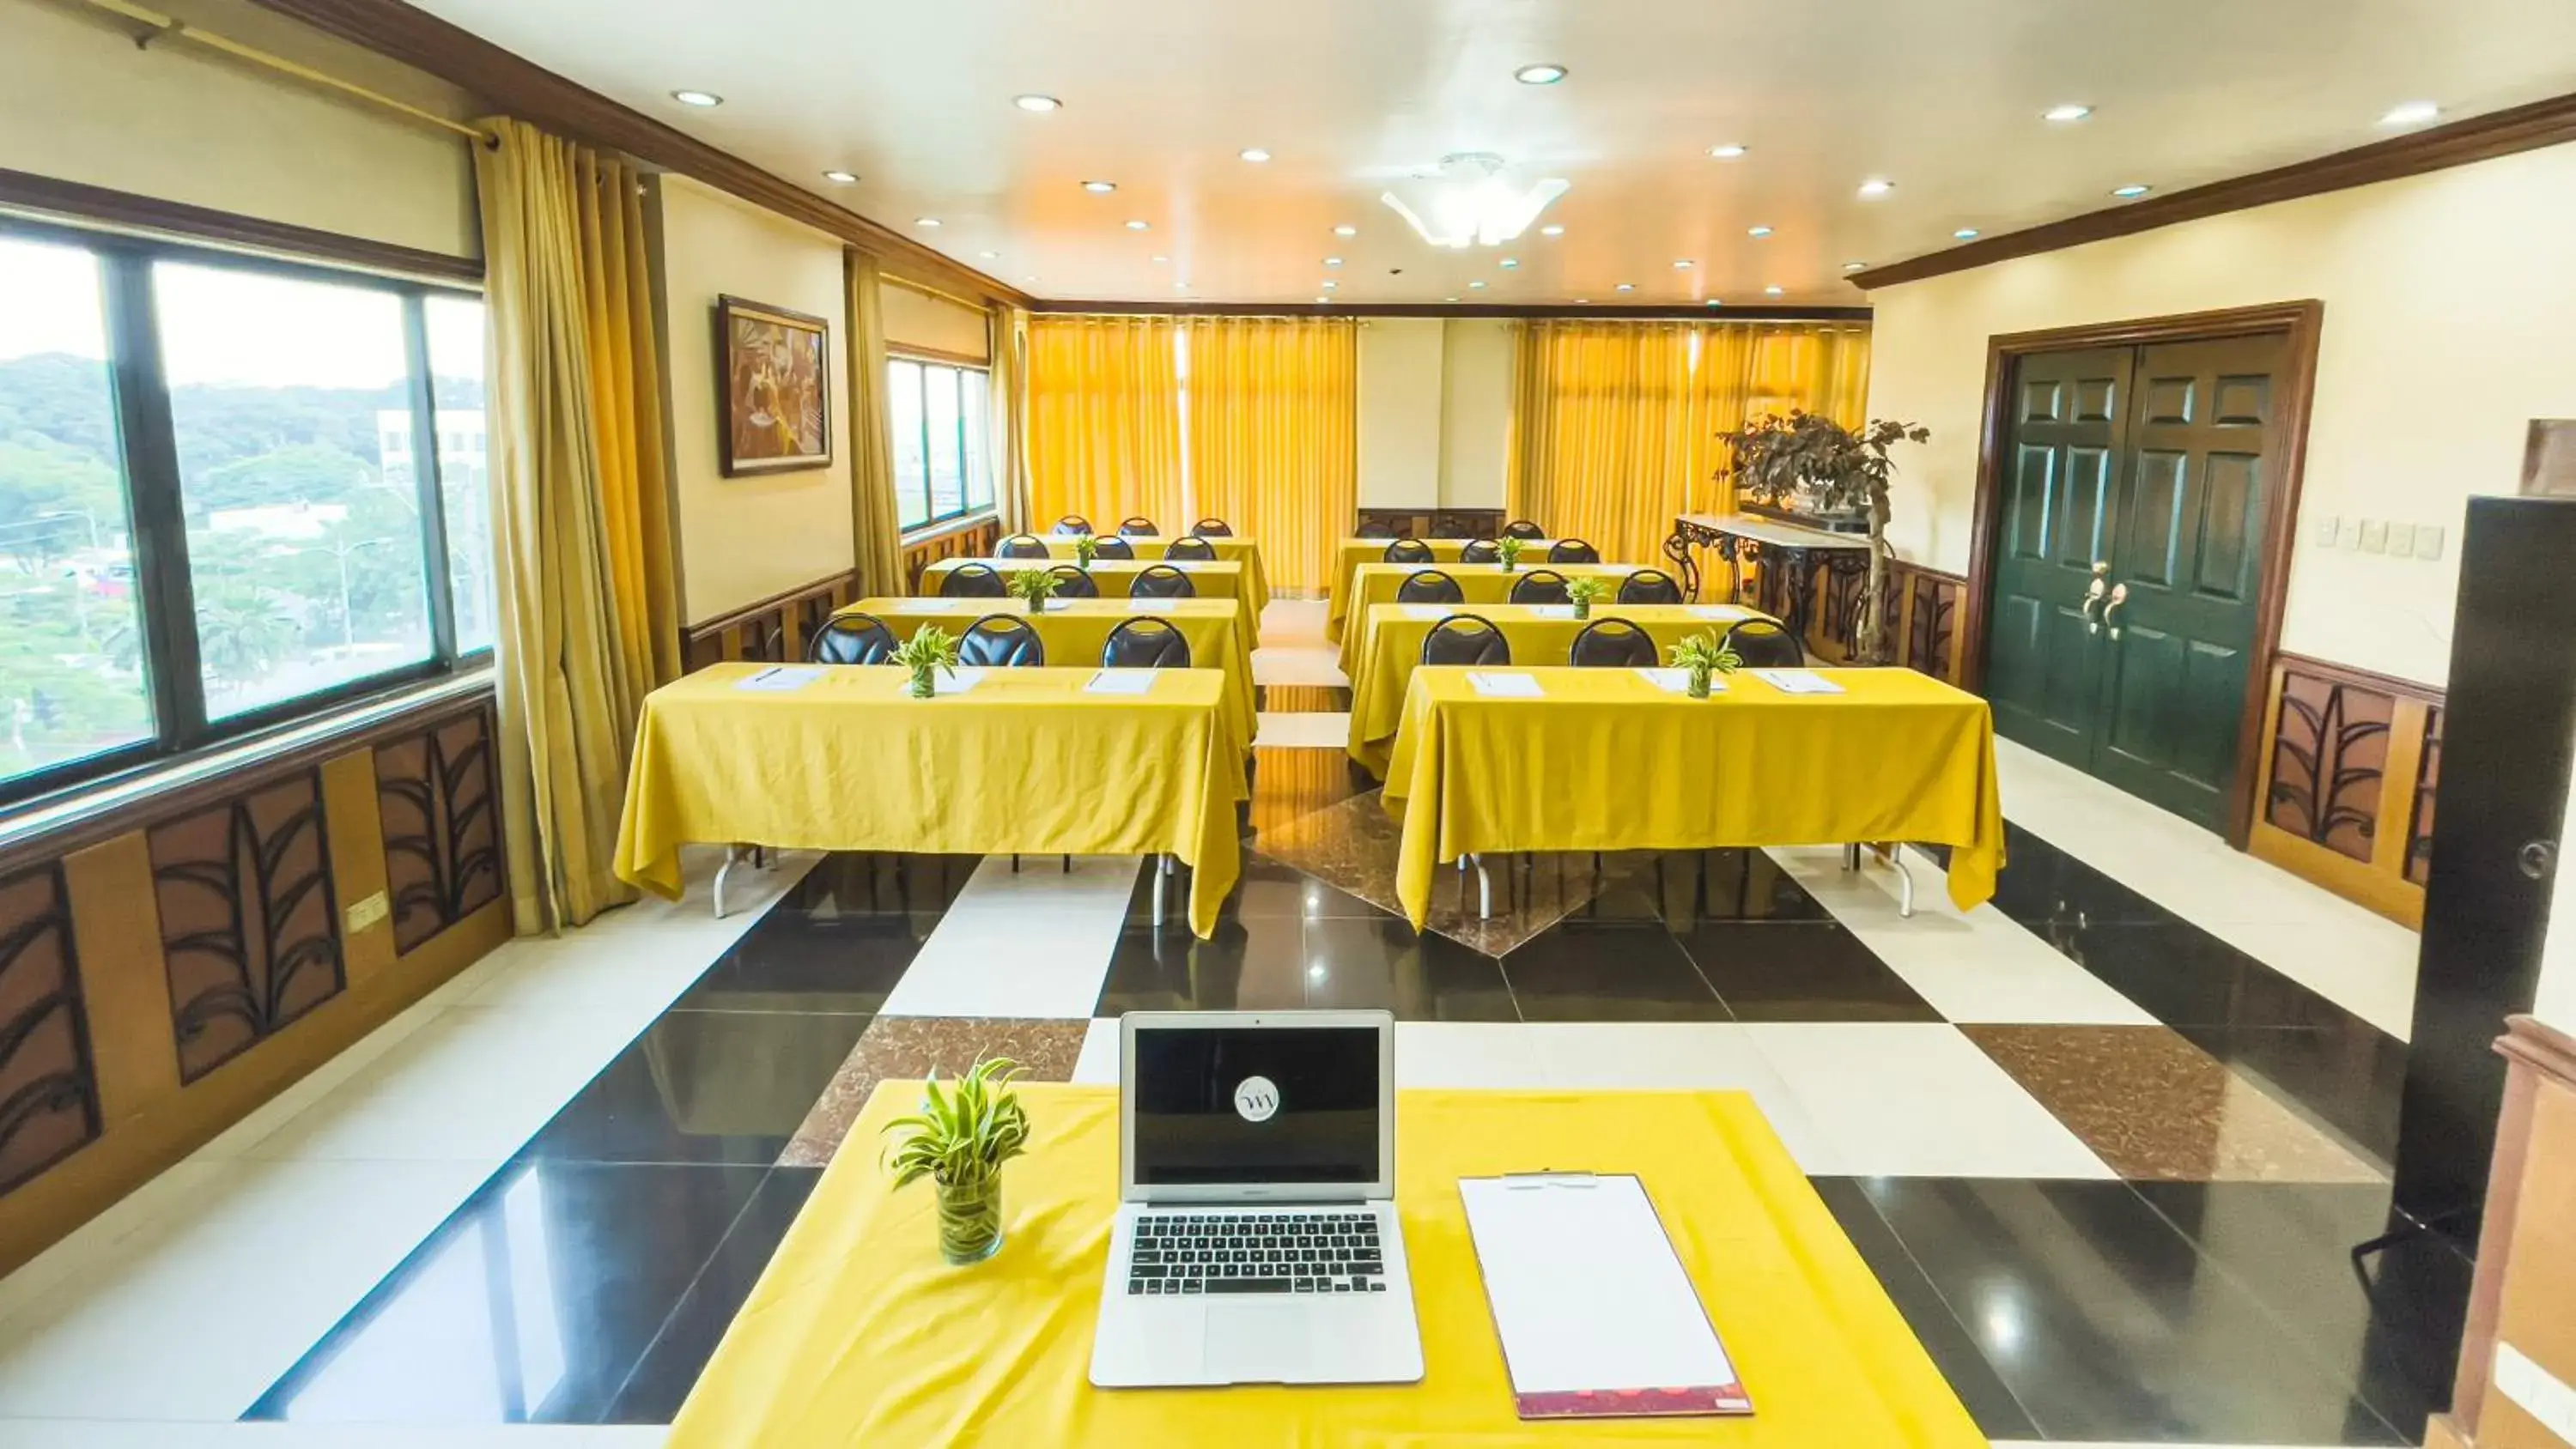 Meeting/conference room in Miramar Hotel